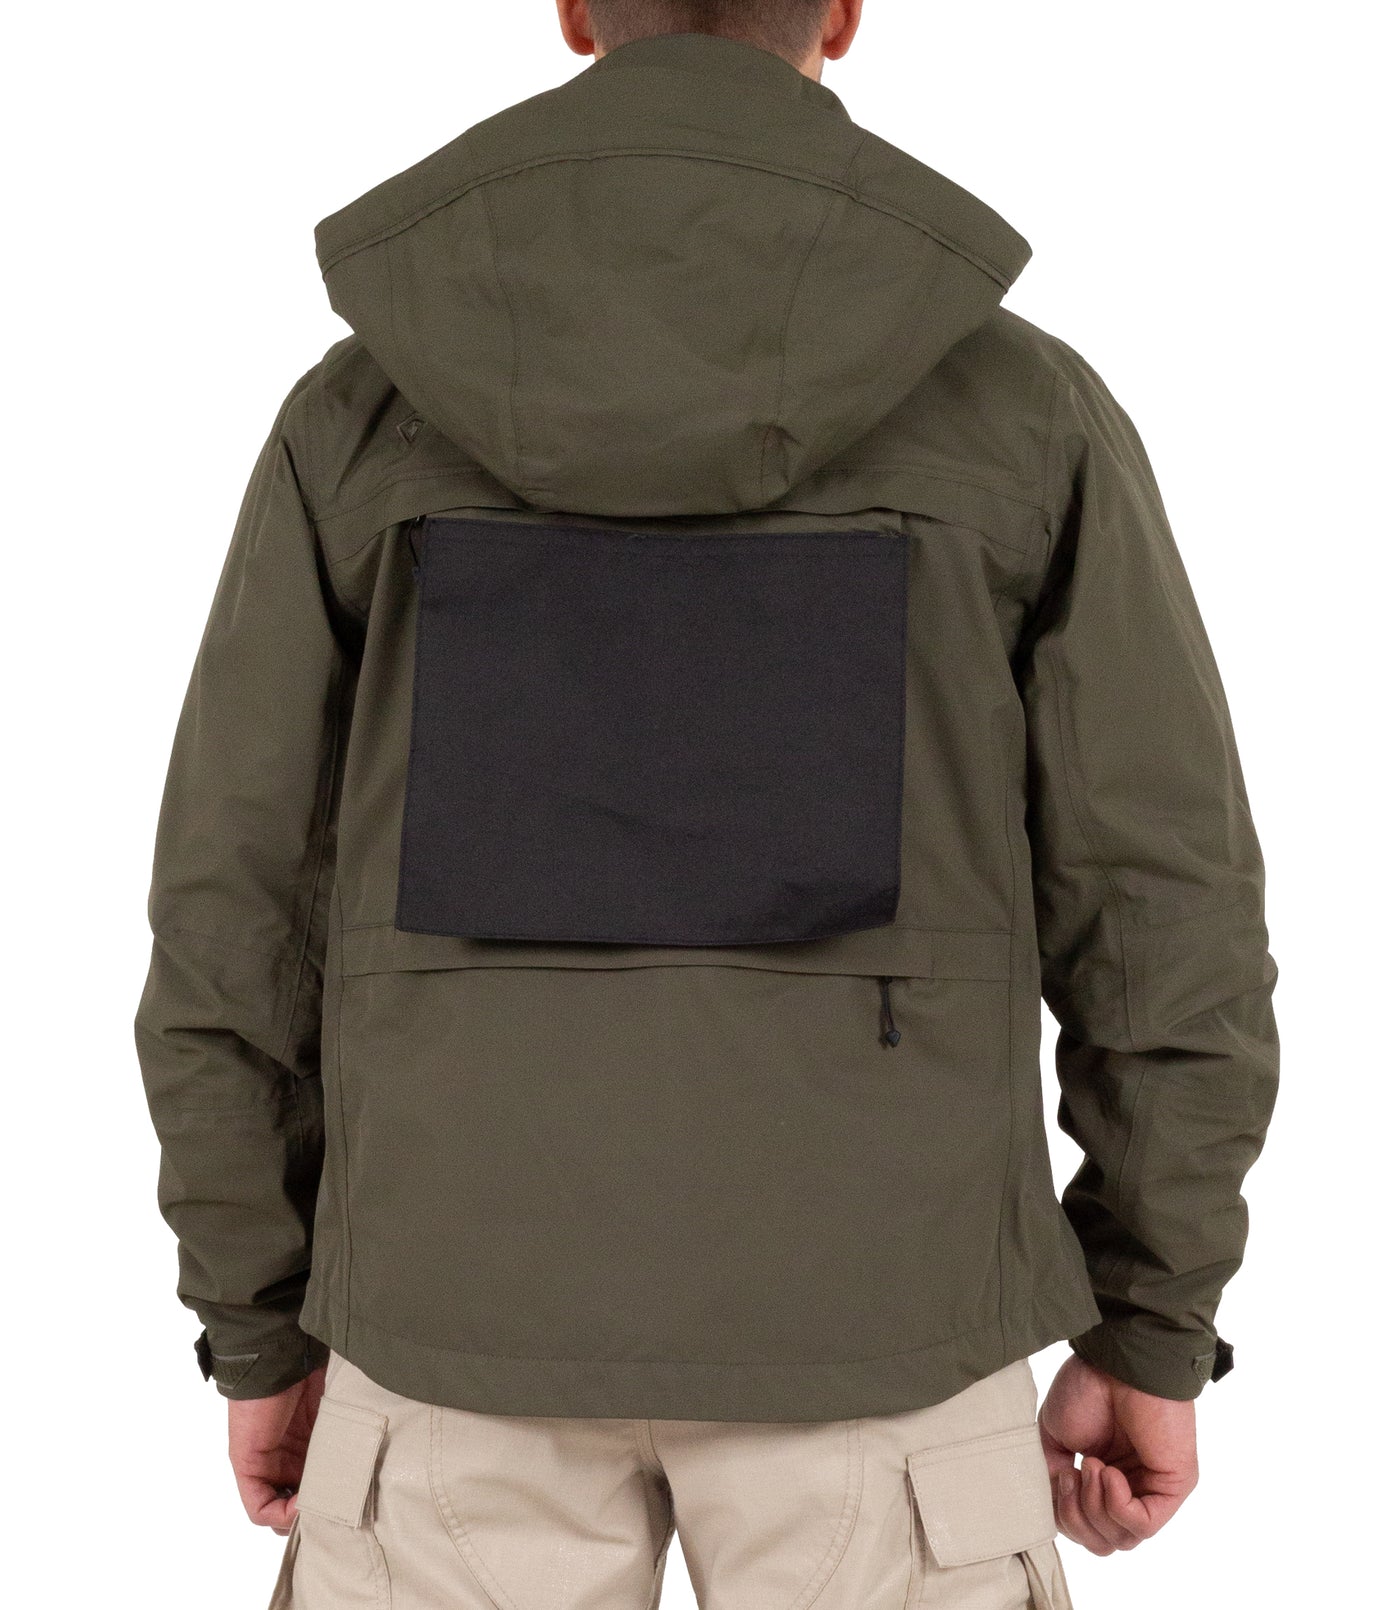 Back Pullout Panel of Men’s Tactix System Jacket in OD Green